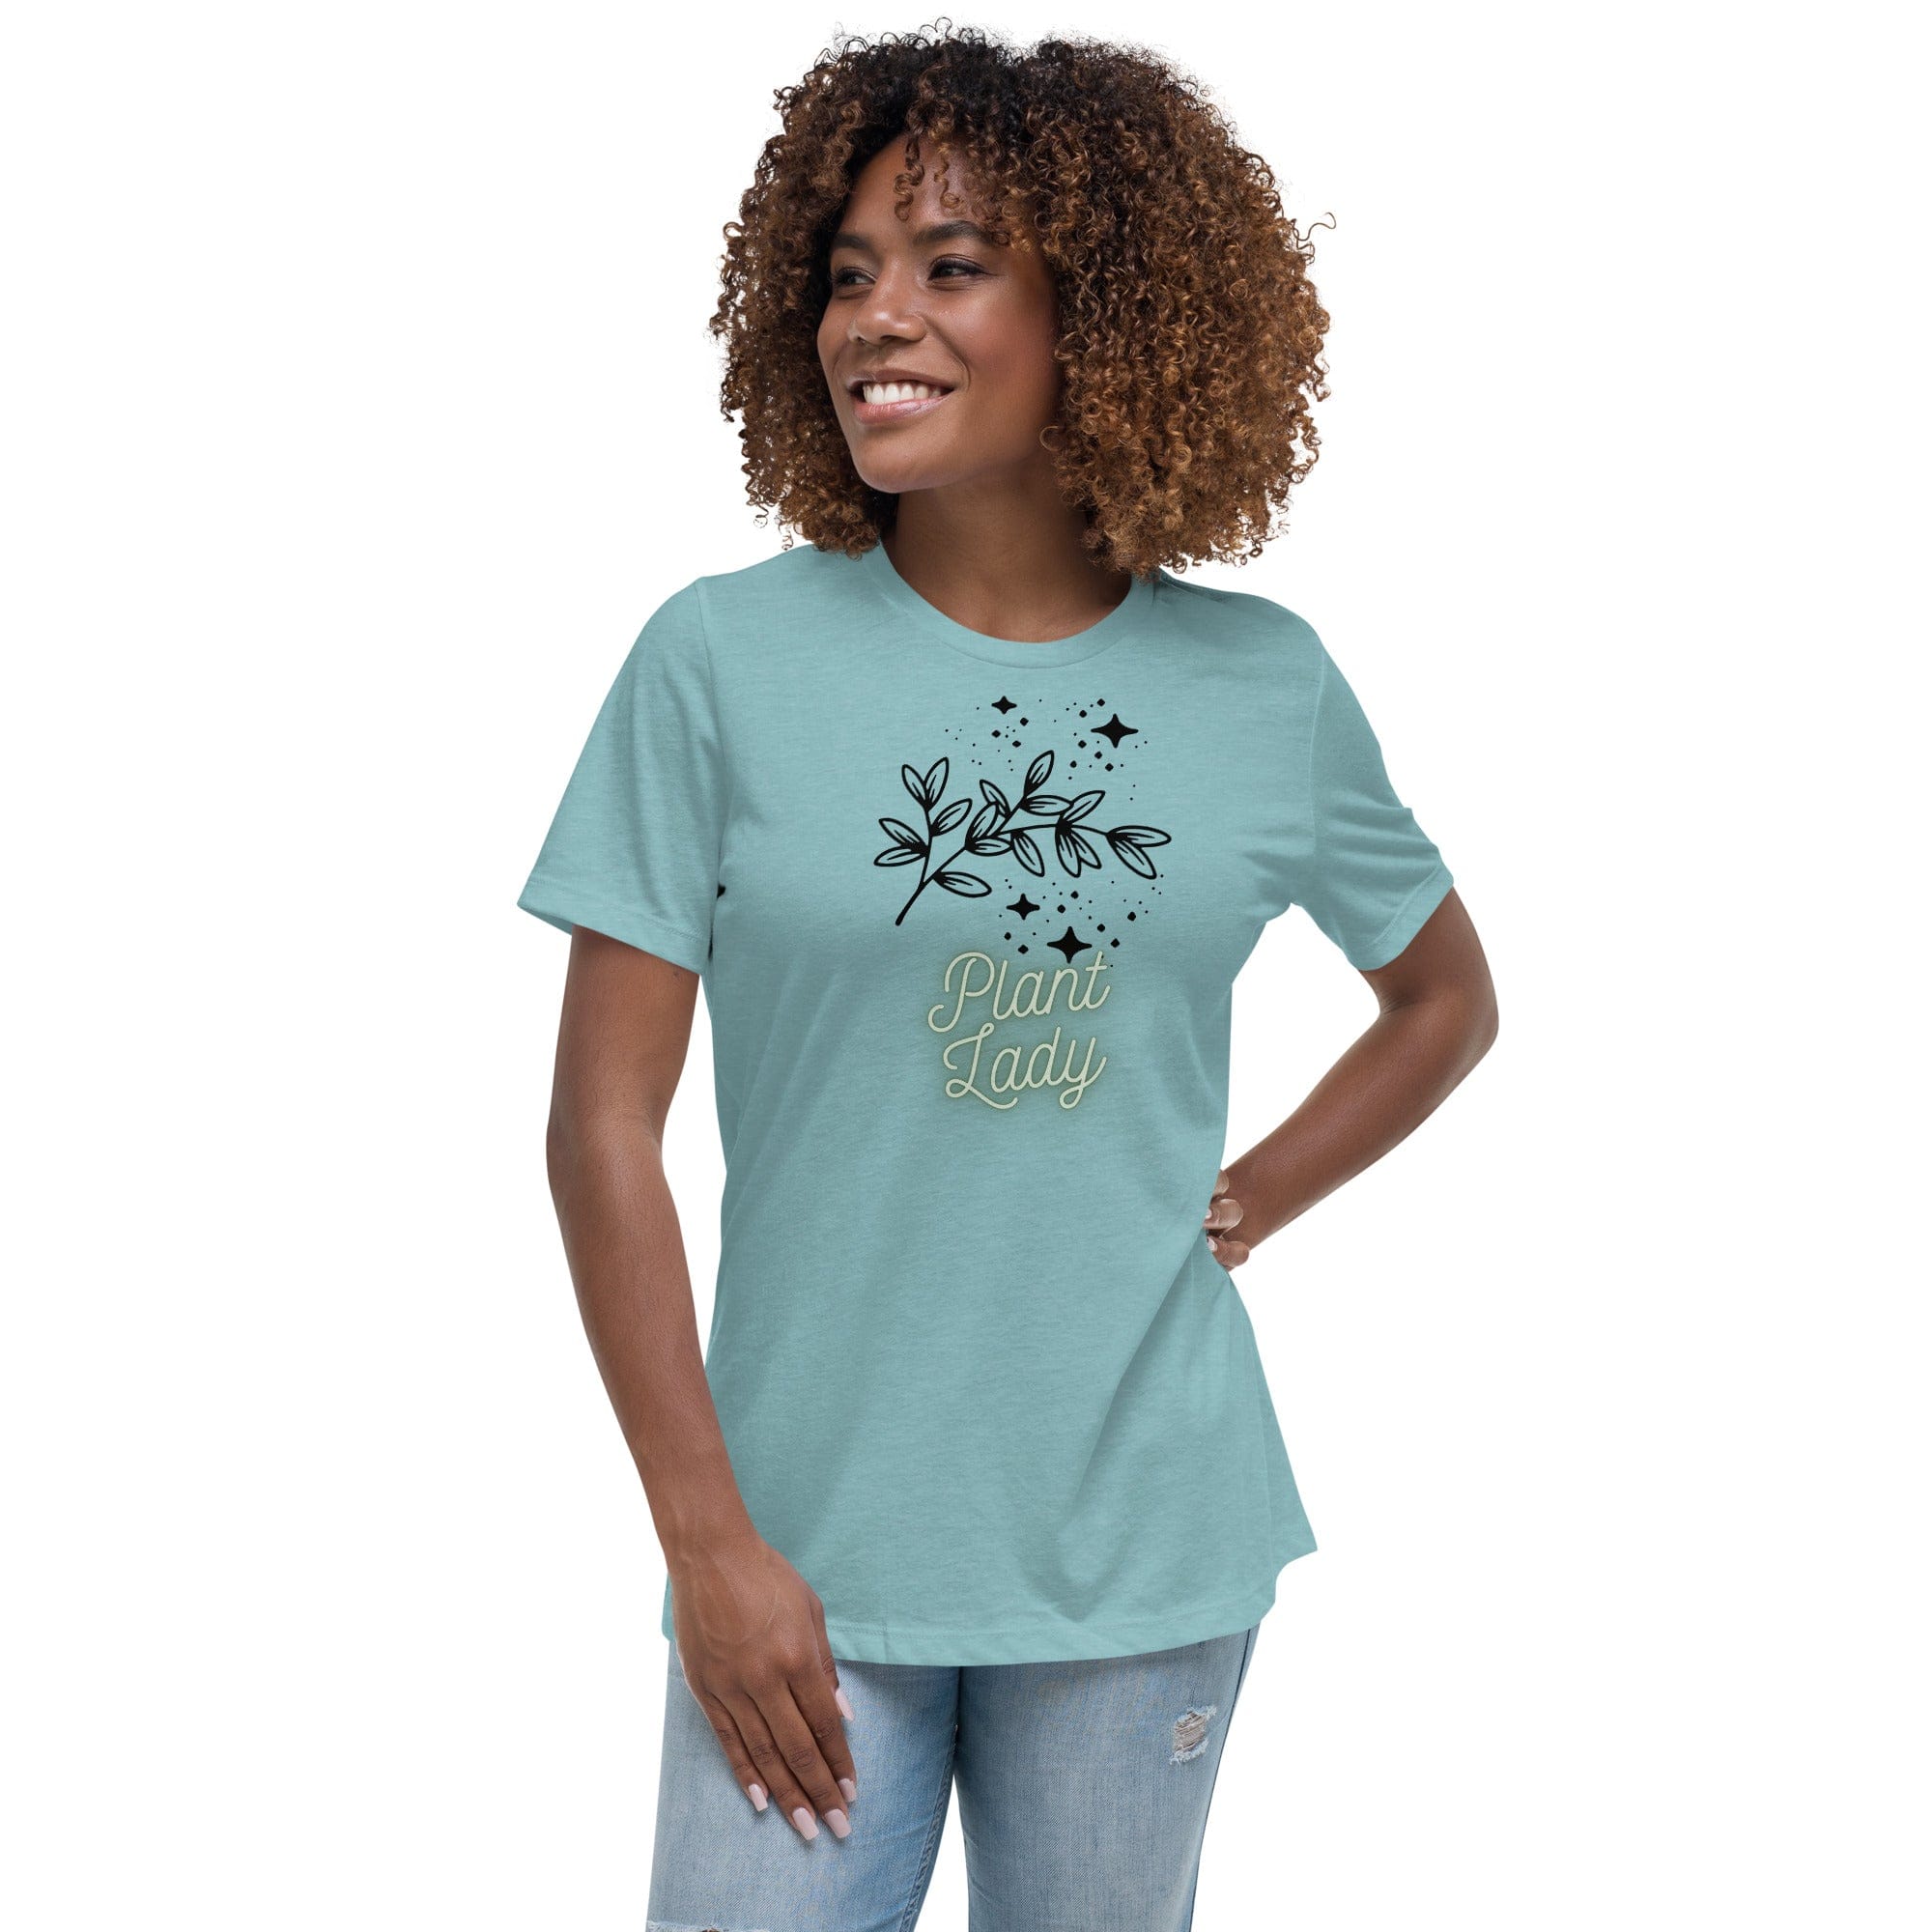 Spruced Roost Heather Blue Lagoon / S Gardner Lady - Women's Relaxed T-Shirt - S-3XL